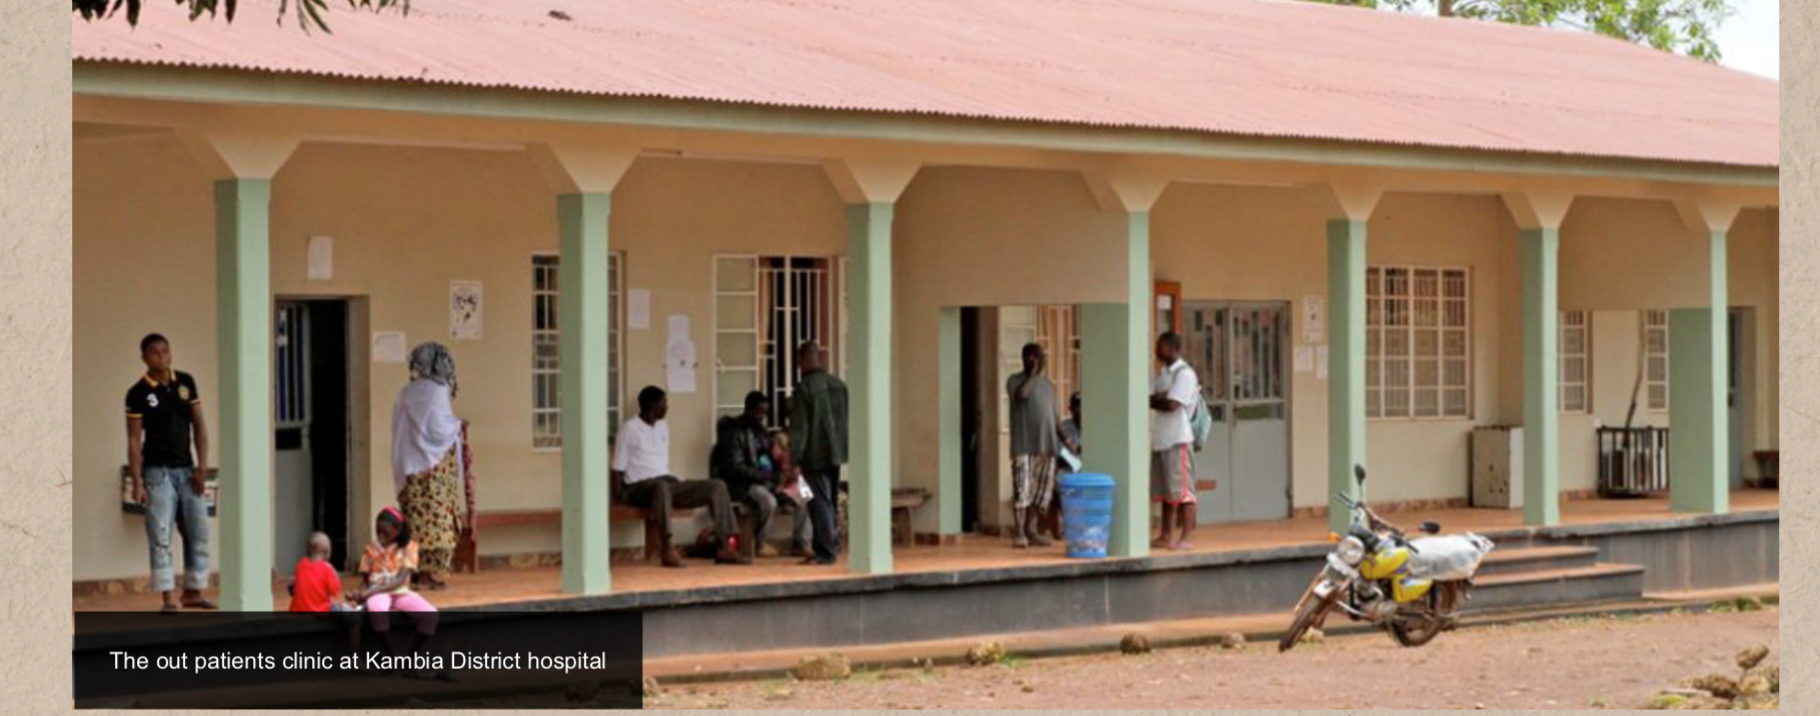 Sierra Leone to increase domestic health funding  in 2022 by $5.9m as donor funds shrink